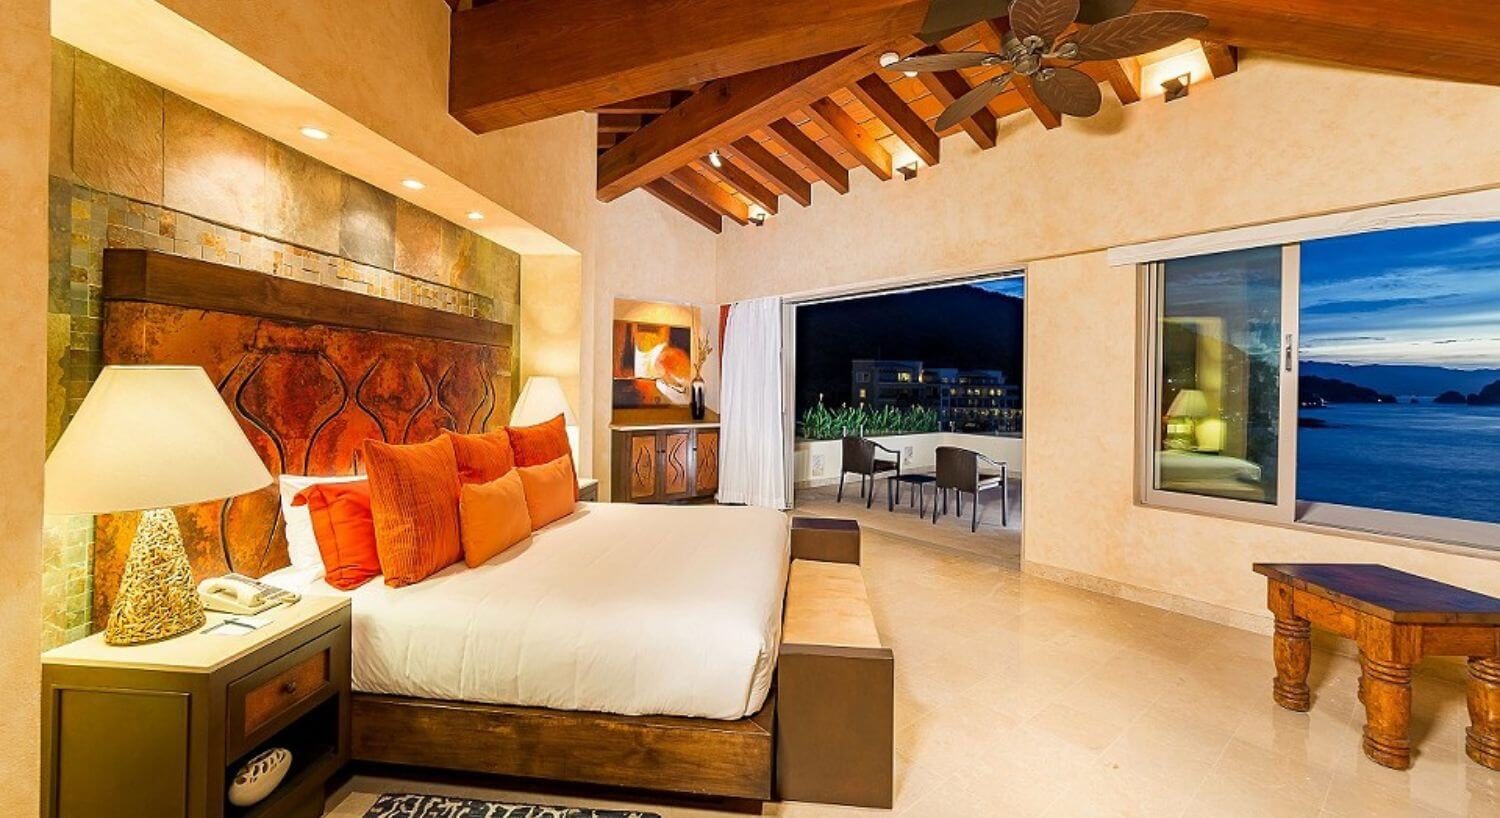 A spacious bedroom with King bed with white and orange bedding, a nightstand with lamp on either side, a bench below an open window, and sliding doors that lead out to a private balcony with patio furniture, and views of the ocean and mountains.